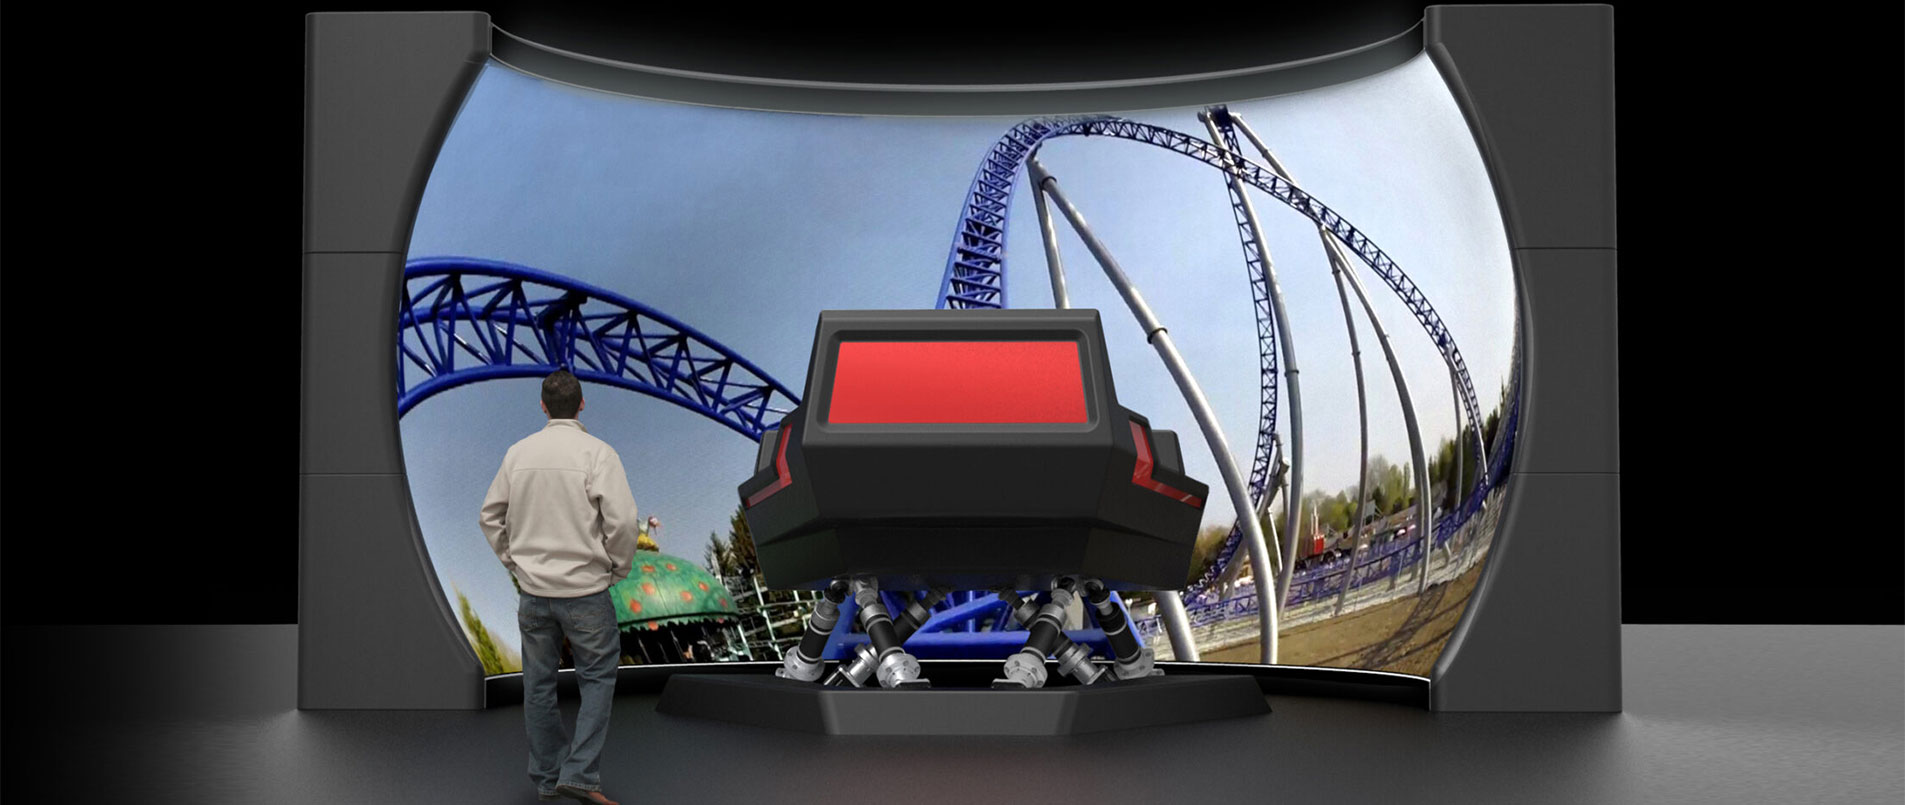 Today’s dark rides use immersive technology